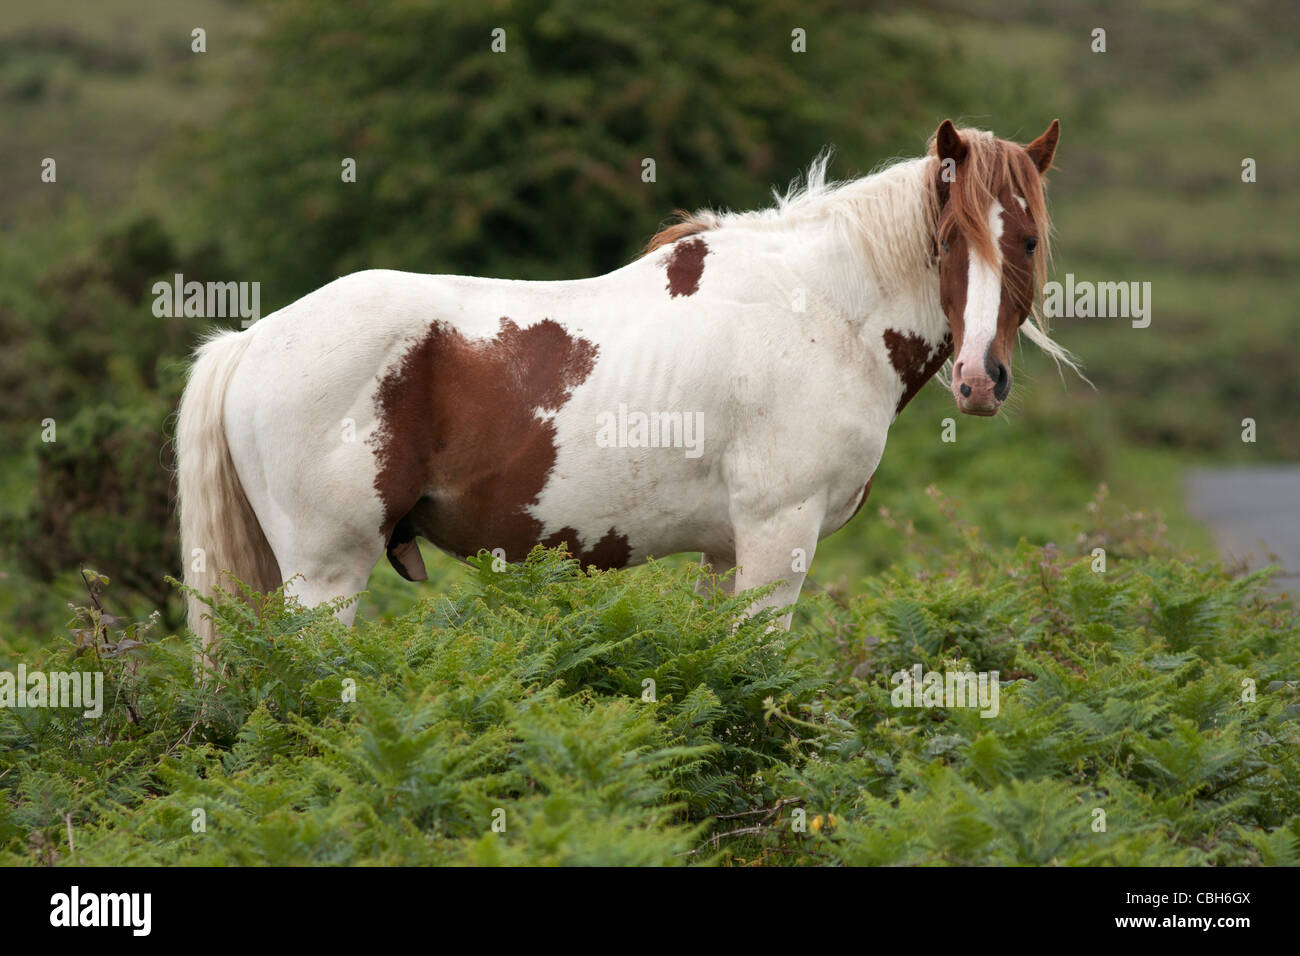 A horse in New forest looking at the camera. Stock Photo